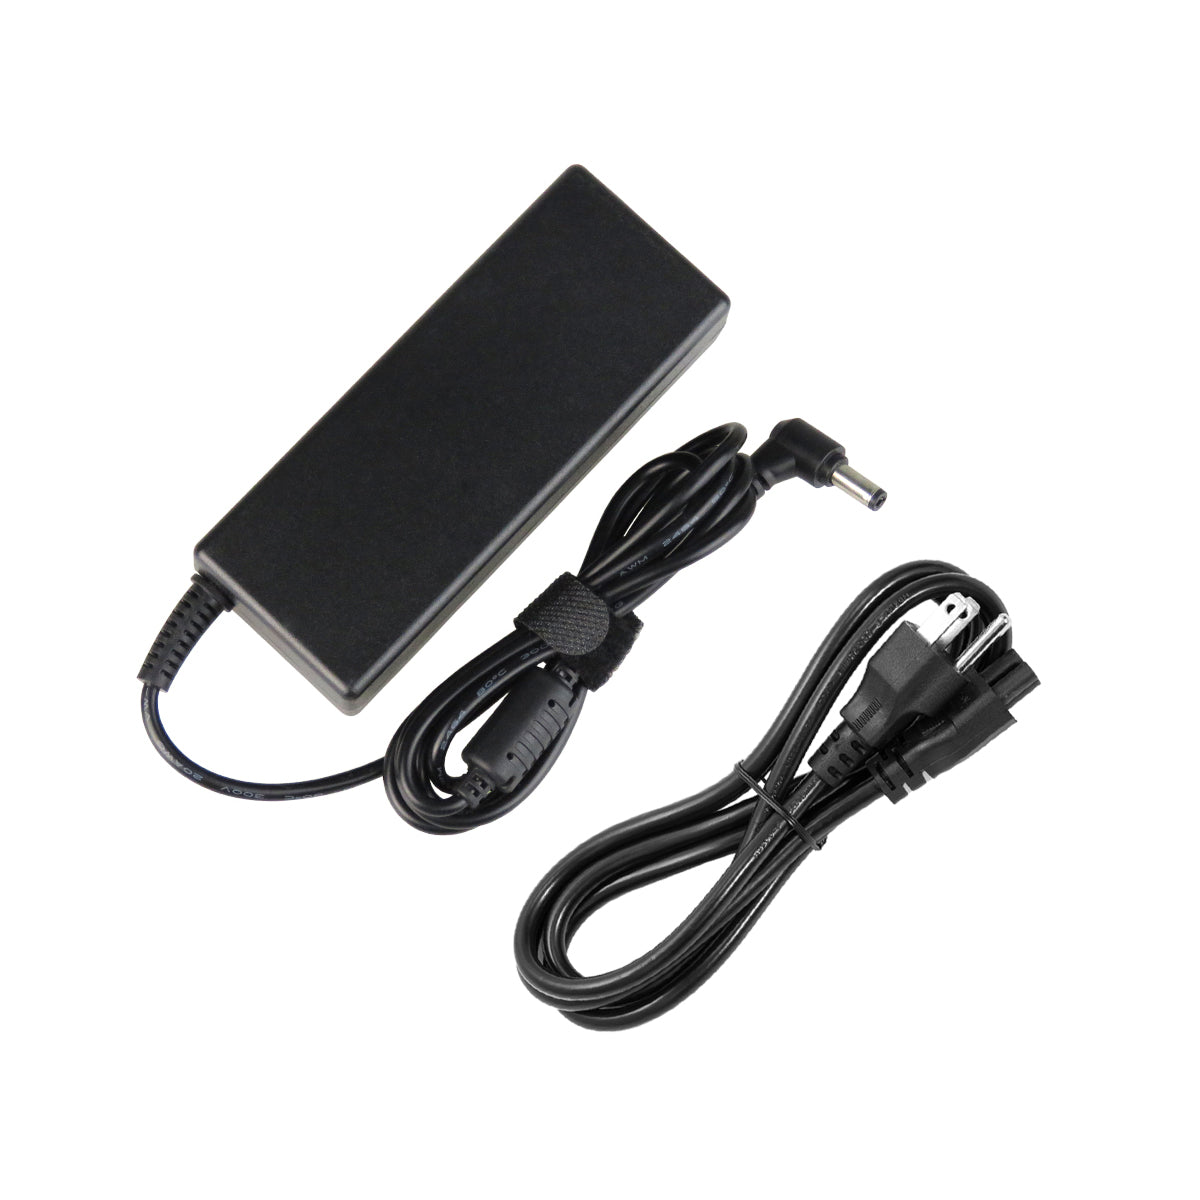 AC Adapter Charger for ASUS X80 Series Notebook.